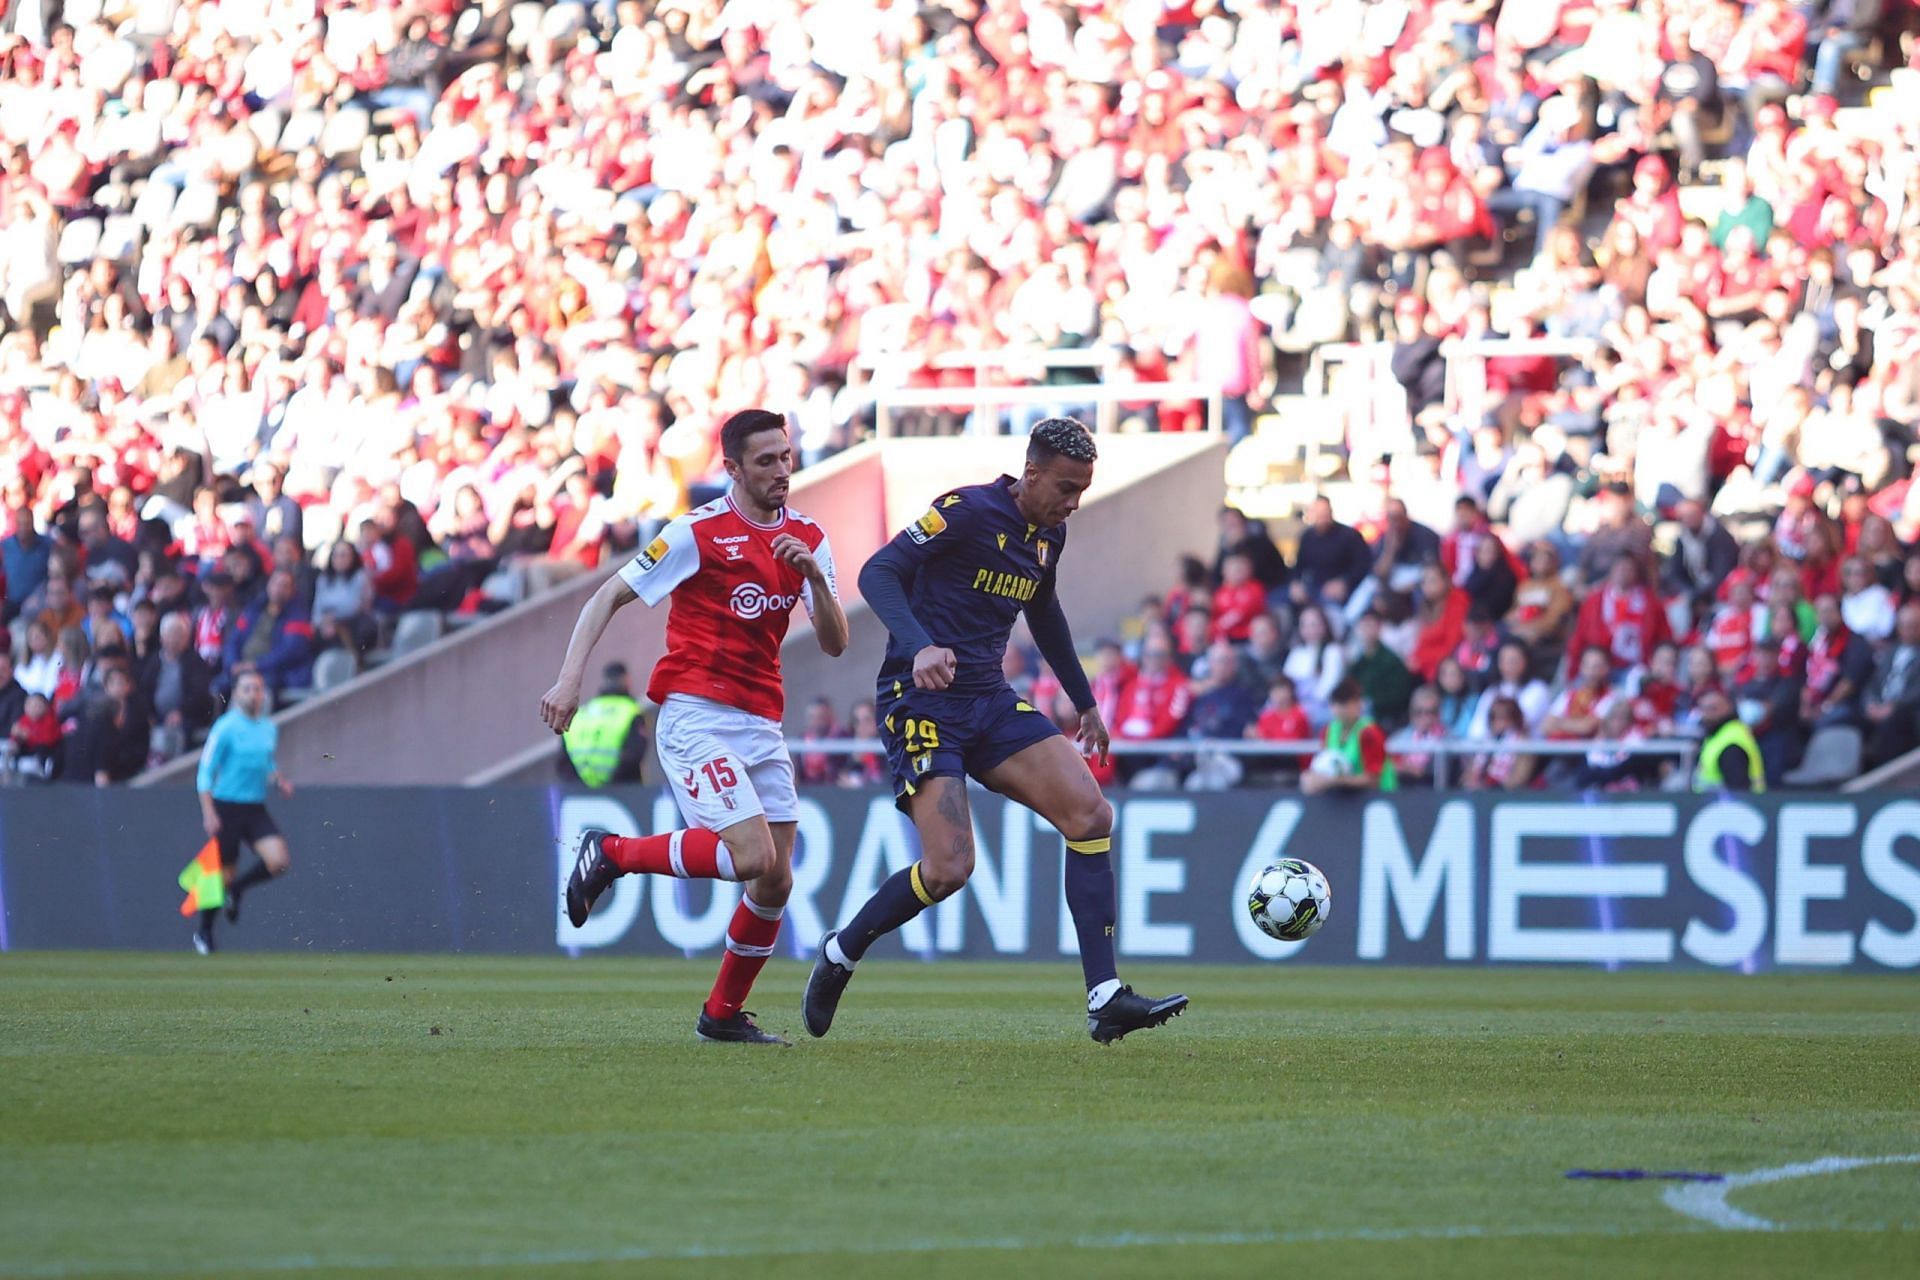 Braga and Famalicao will meet in their Primeira Liga campaign opener on Friday